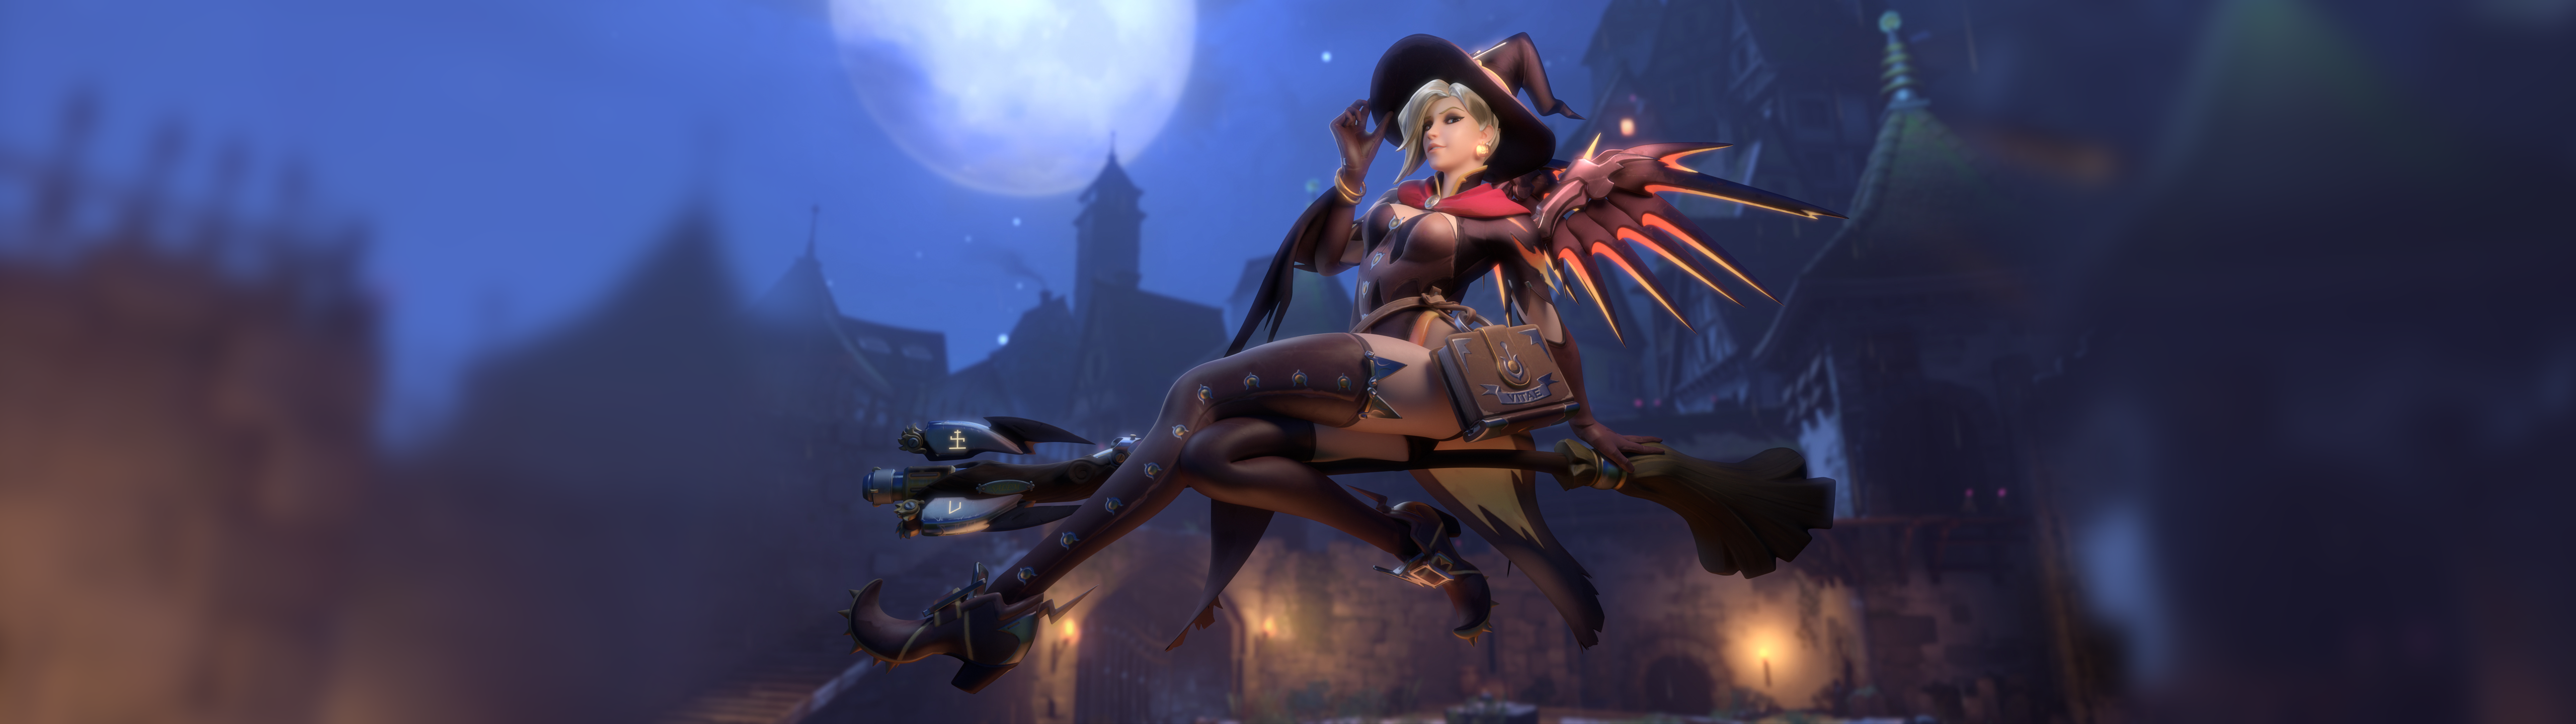 Witch Mercy Mercy Overwatch Overwatch Halloween Witch Thigh Highs Broom Witches Broom Night Moonligh 5120x1440